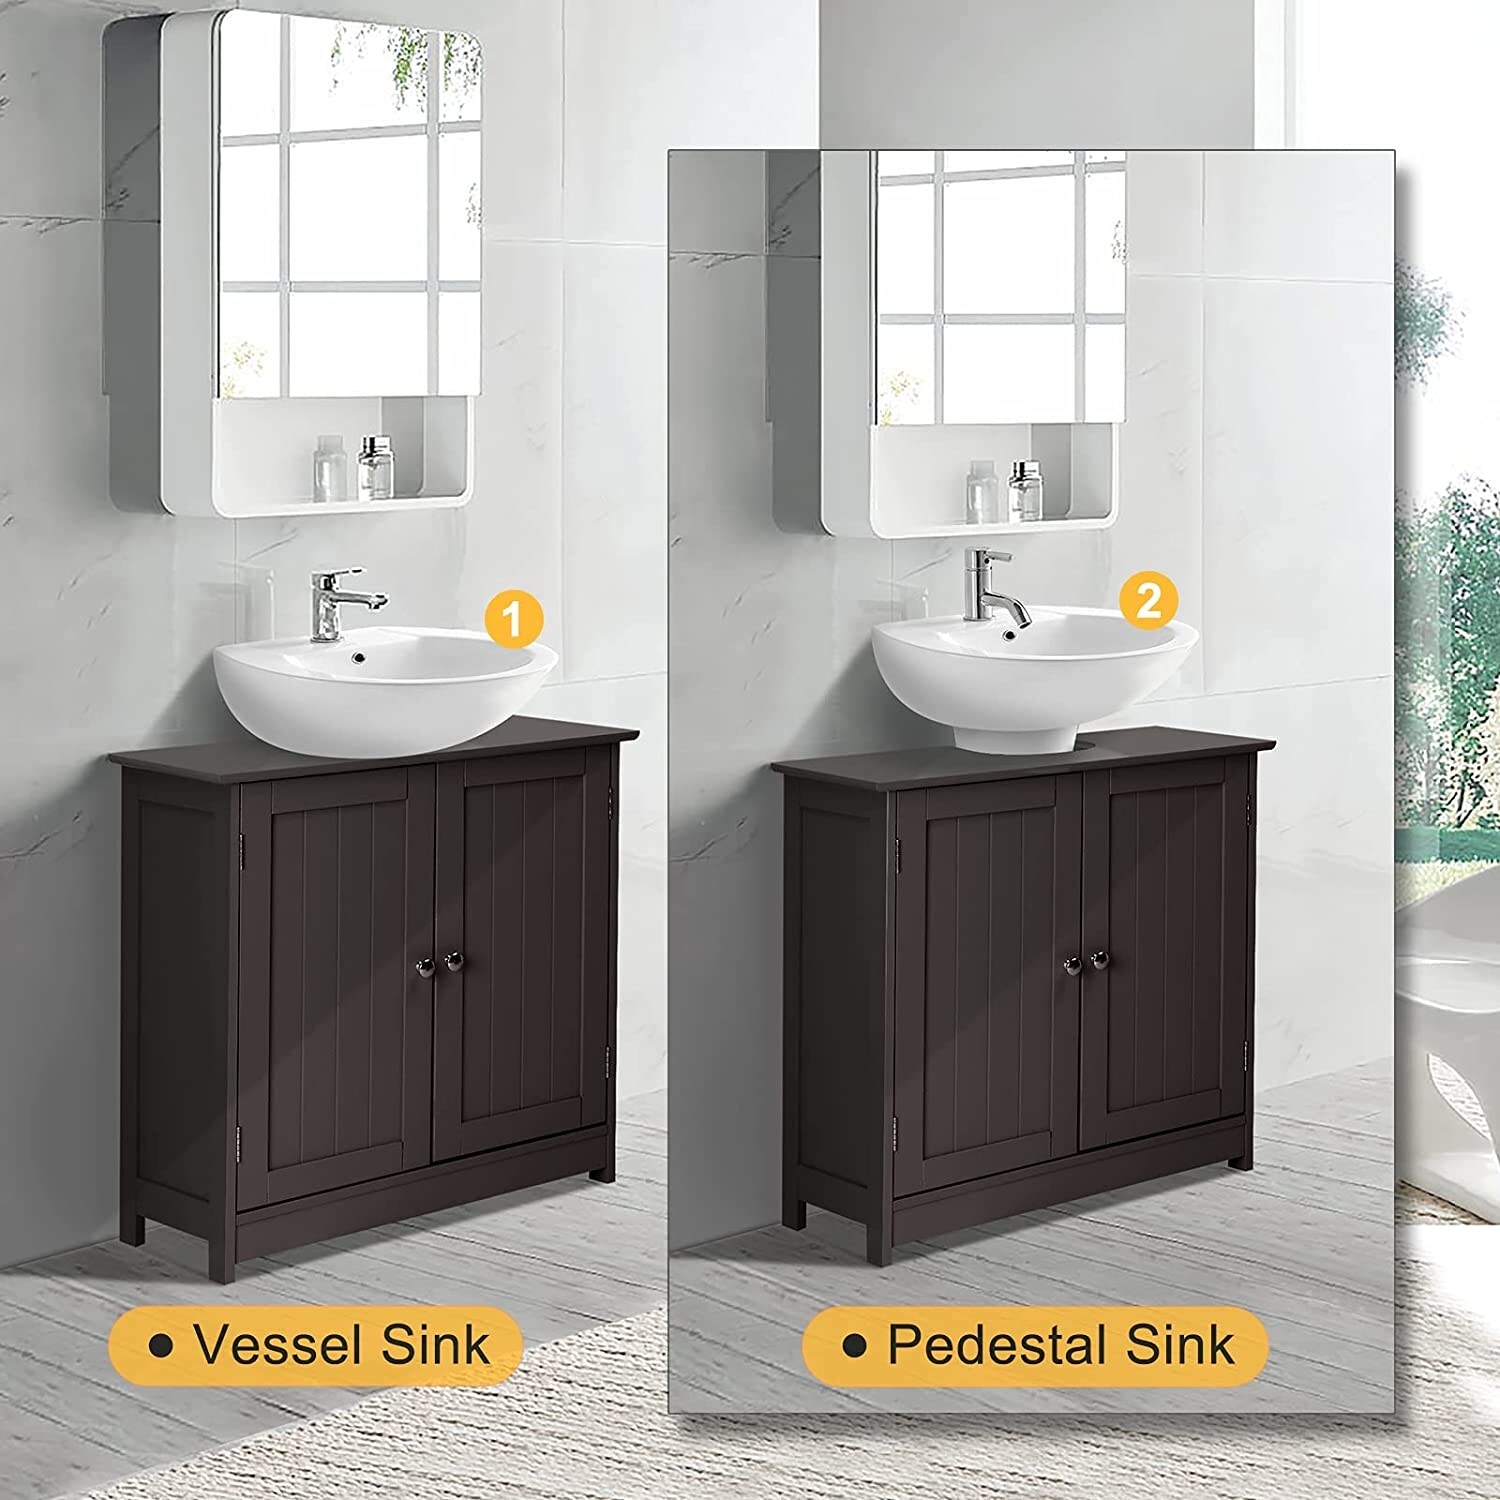 https://ak1.ostkcdn.com/images/products/is/images/direct/aa477ee07f18ee6d0c05b9bd927f53a241a7af79/Pedestal-Under-Sink-Storage-Bathroom-Vanity-with-2-Doors-Traditional-Bathroom-Cabinet-Space-Saver-Organizer-23-5-8.jpg